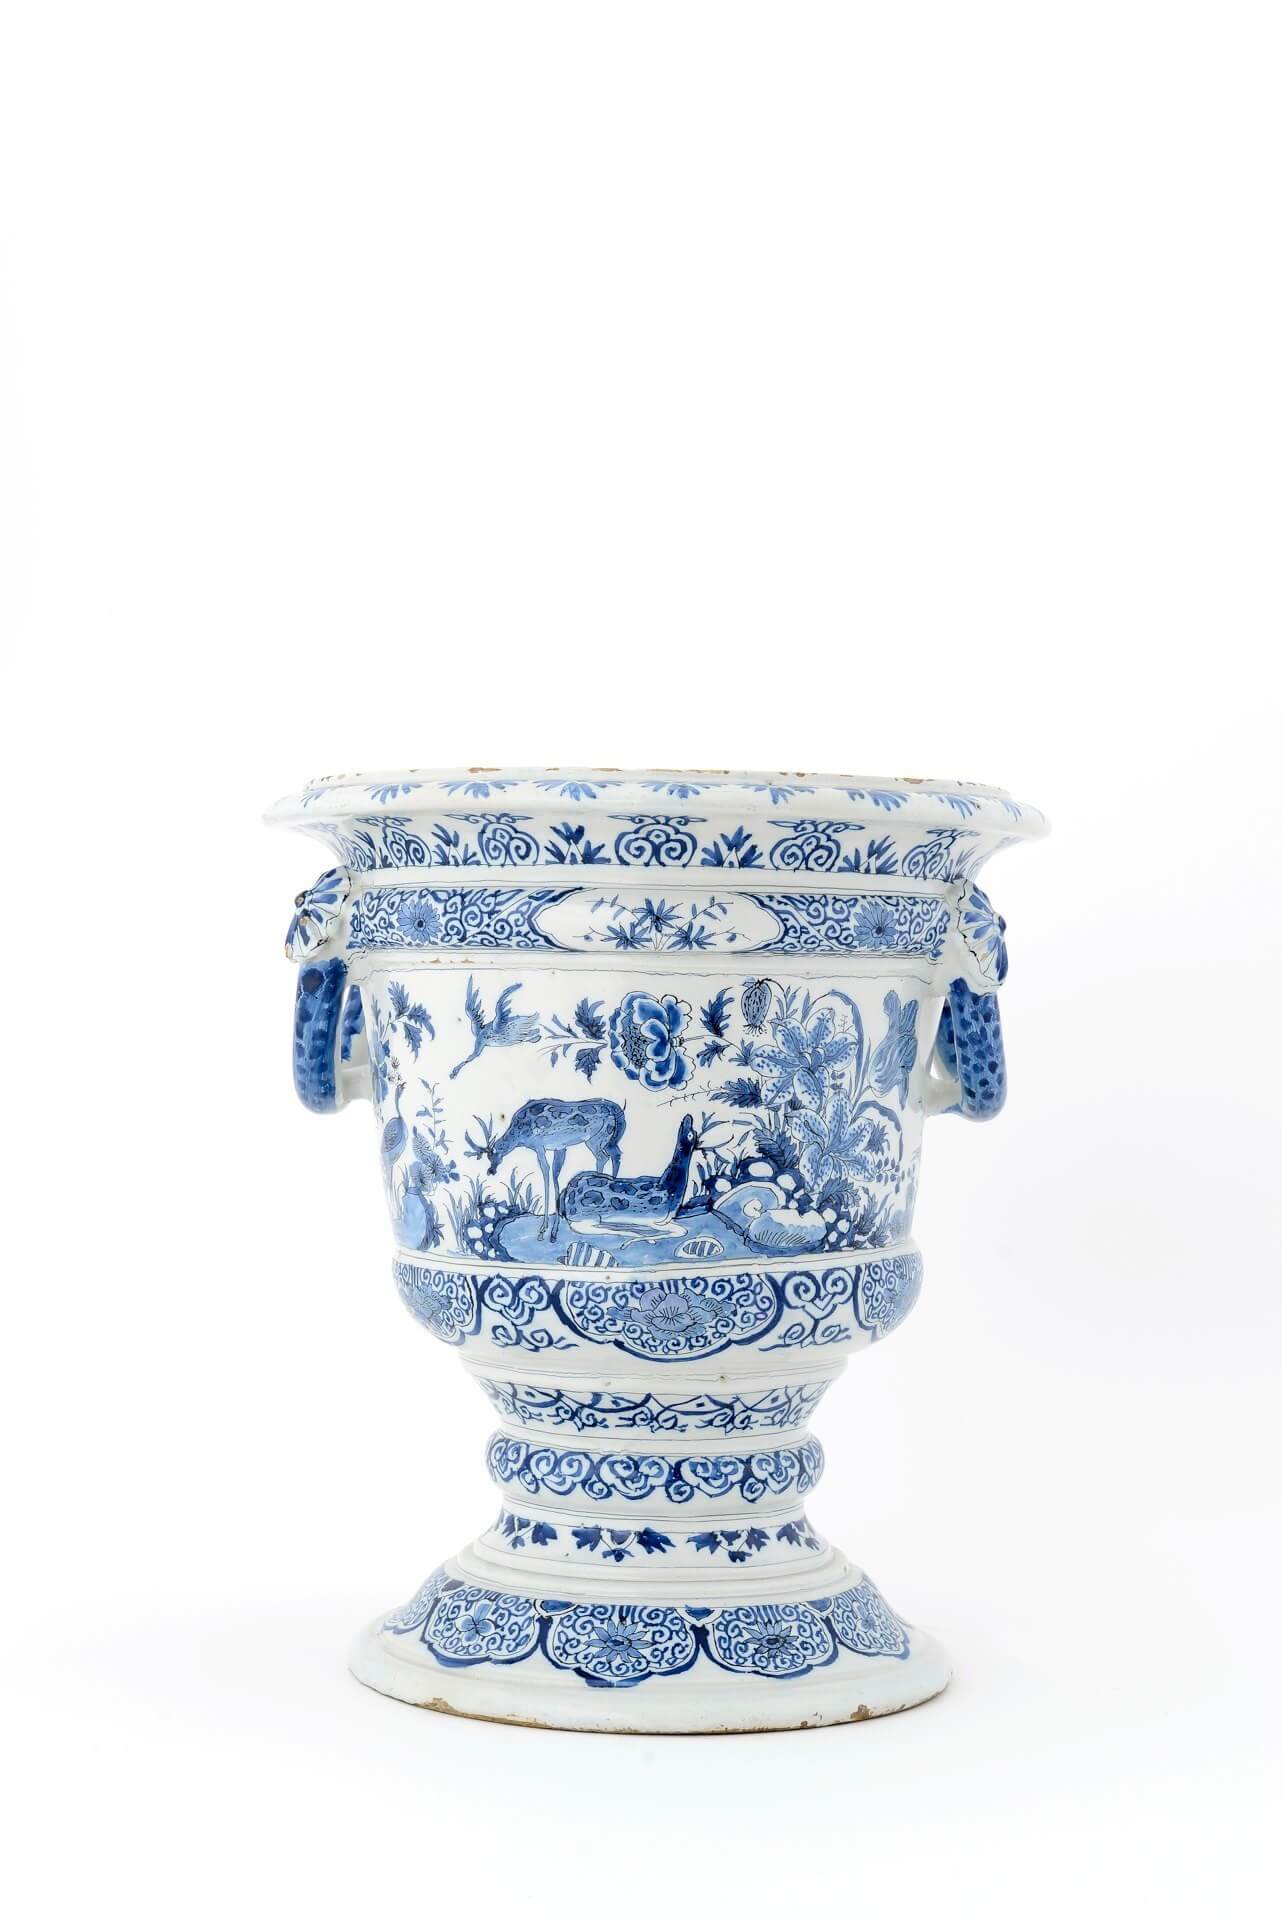 Antique Delft blue and white urn